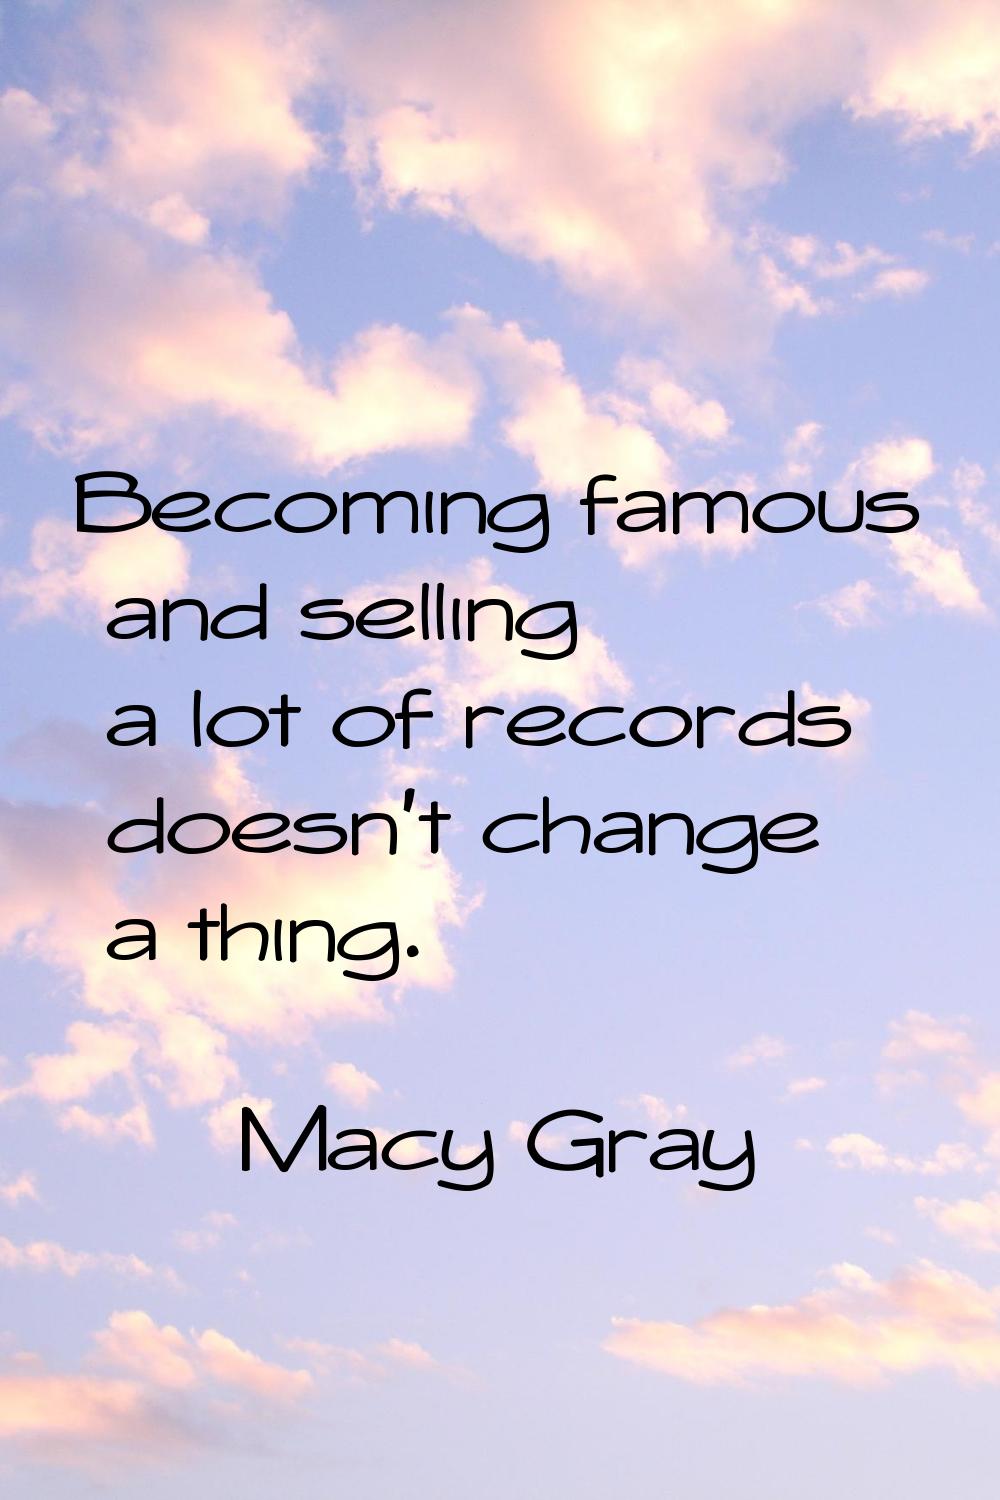 Becoming famous and selling a lot of records doesn't change a thing.